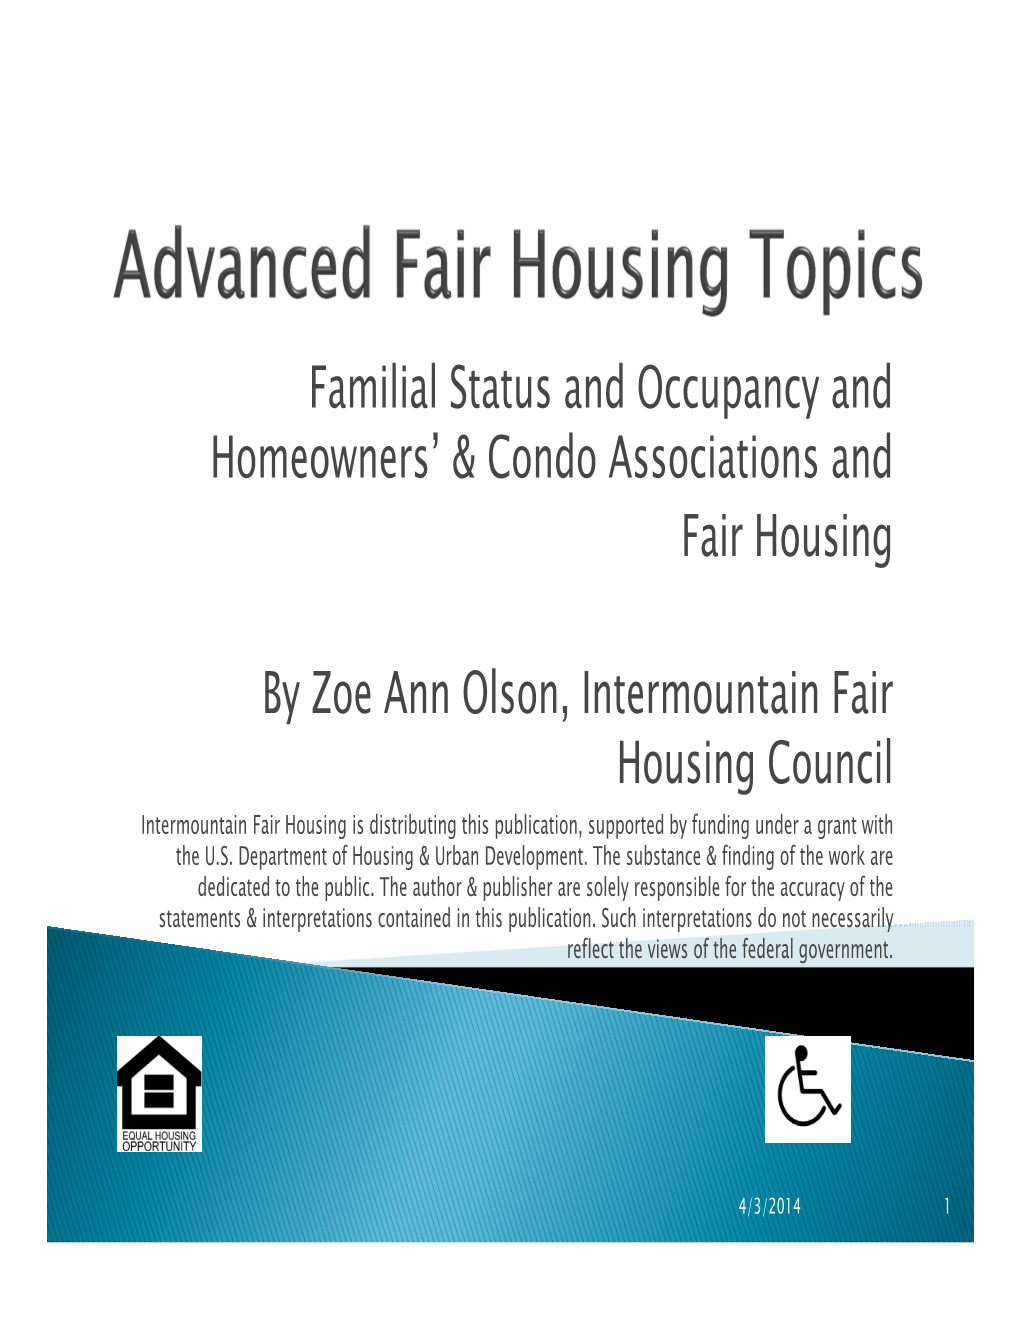 Familial Status and Occupancy and Homeowners' & Condo